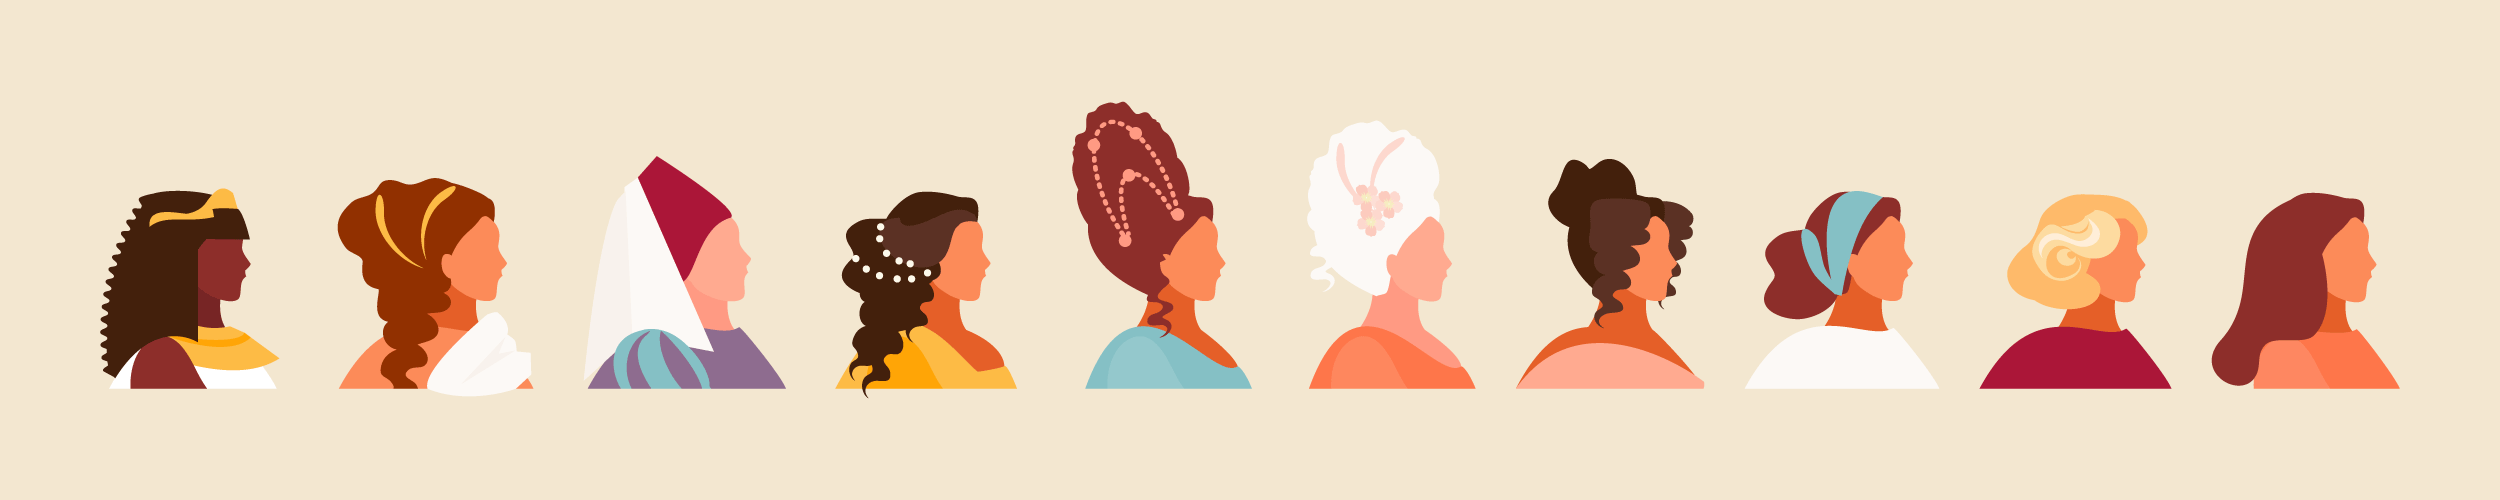 hairstyles.gif